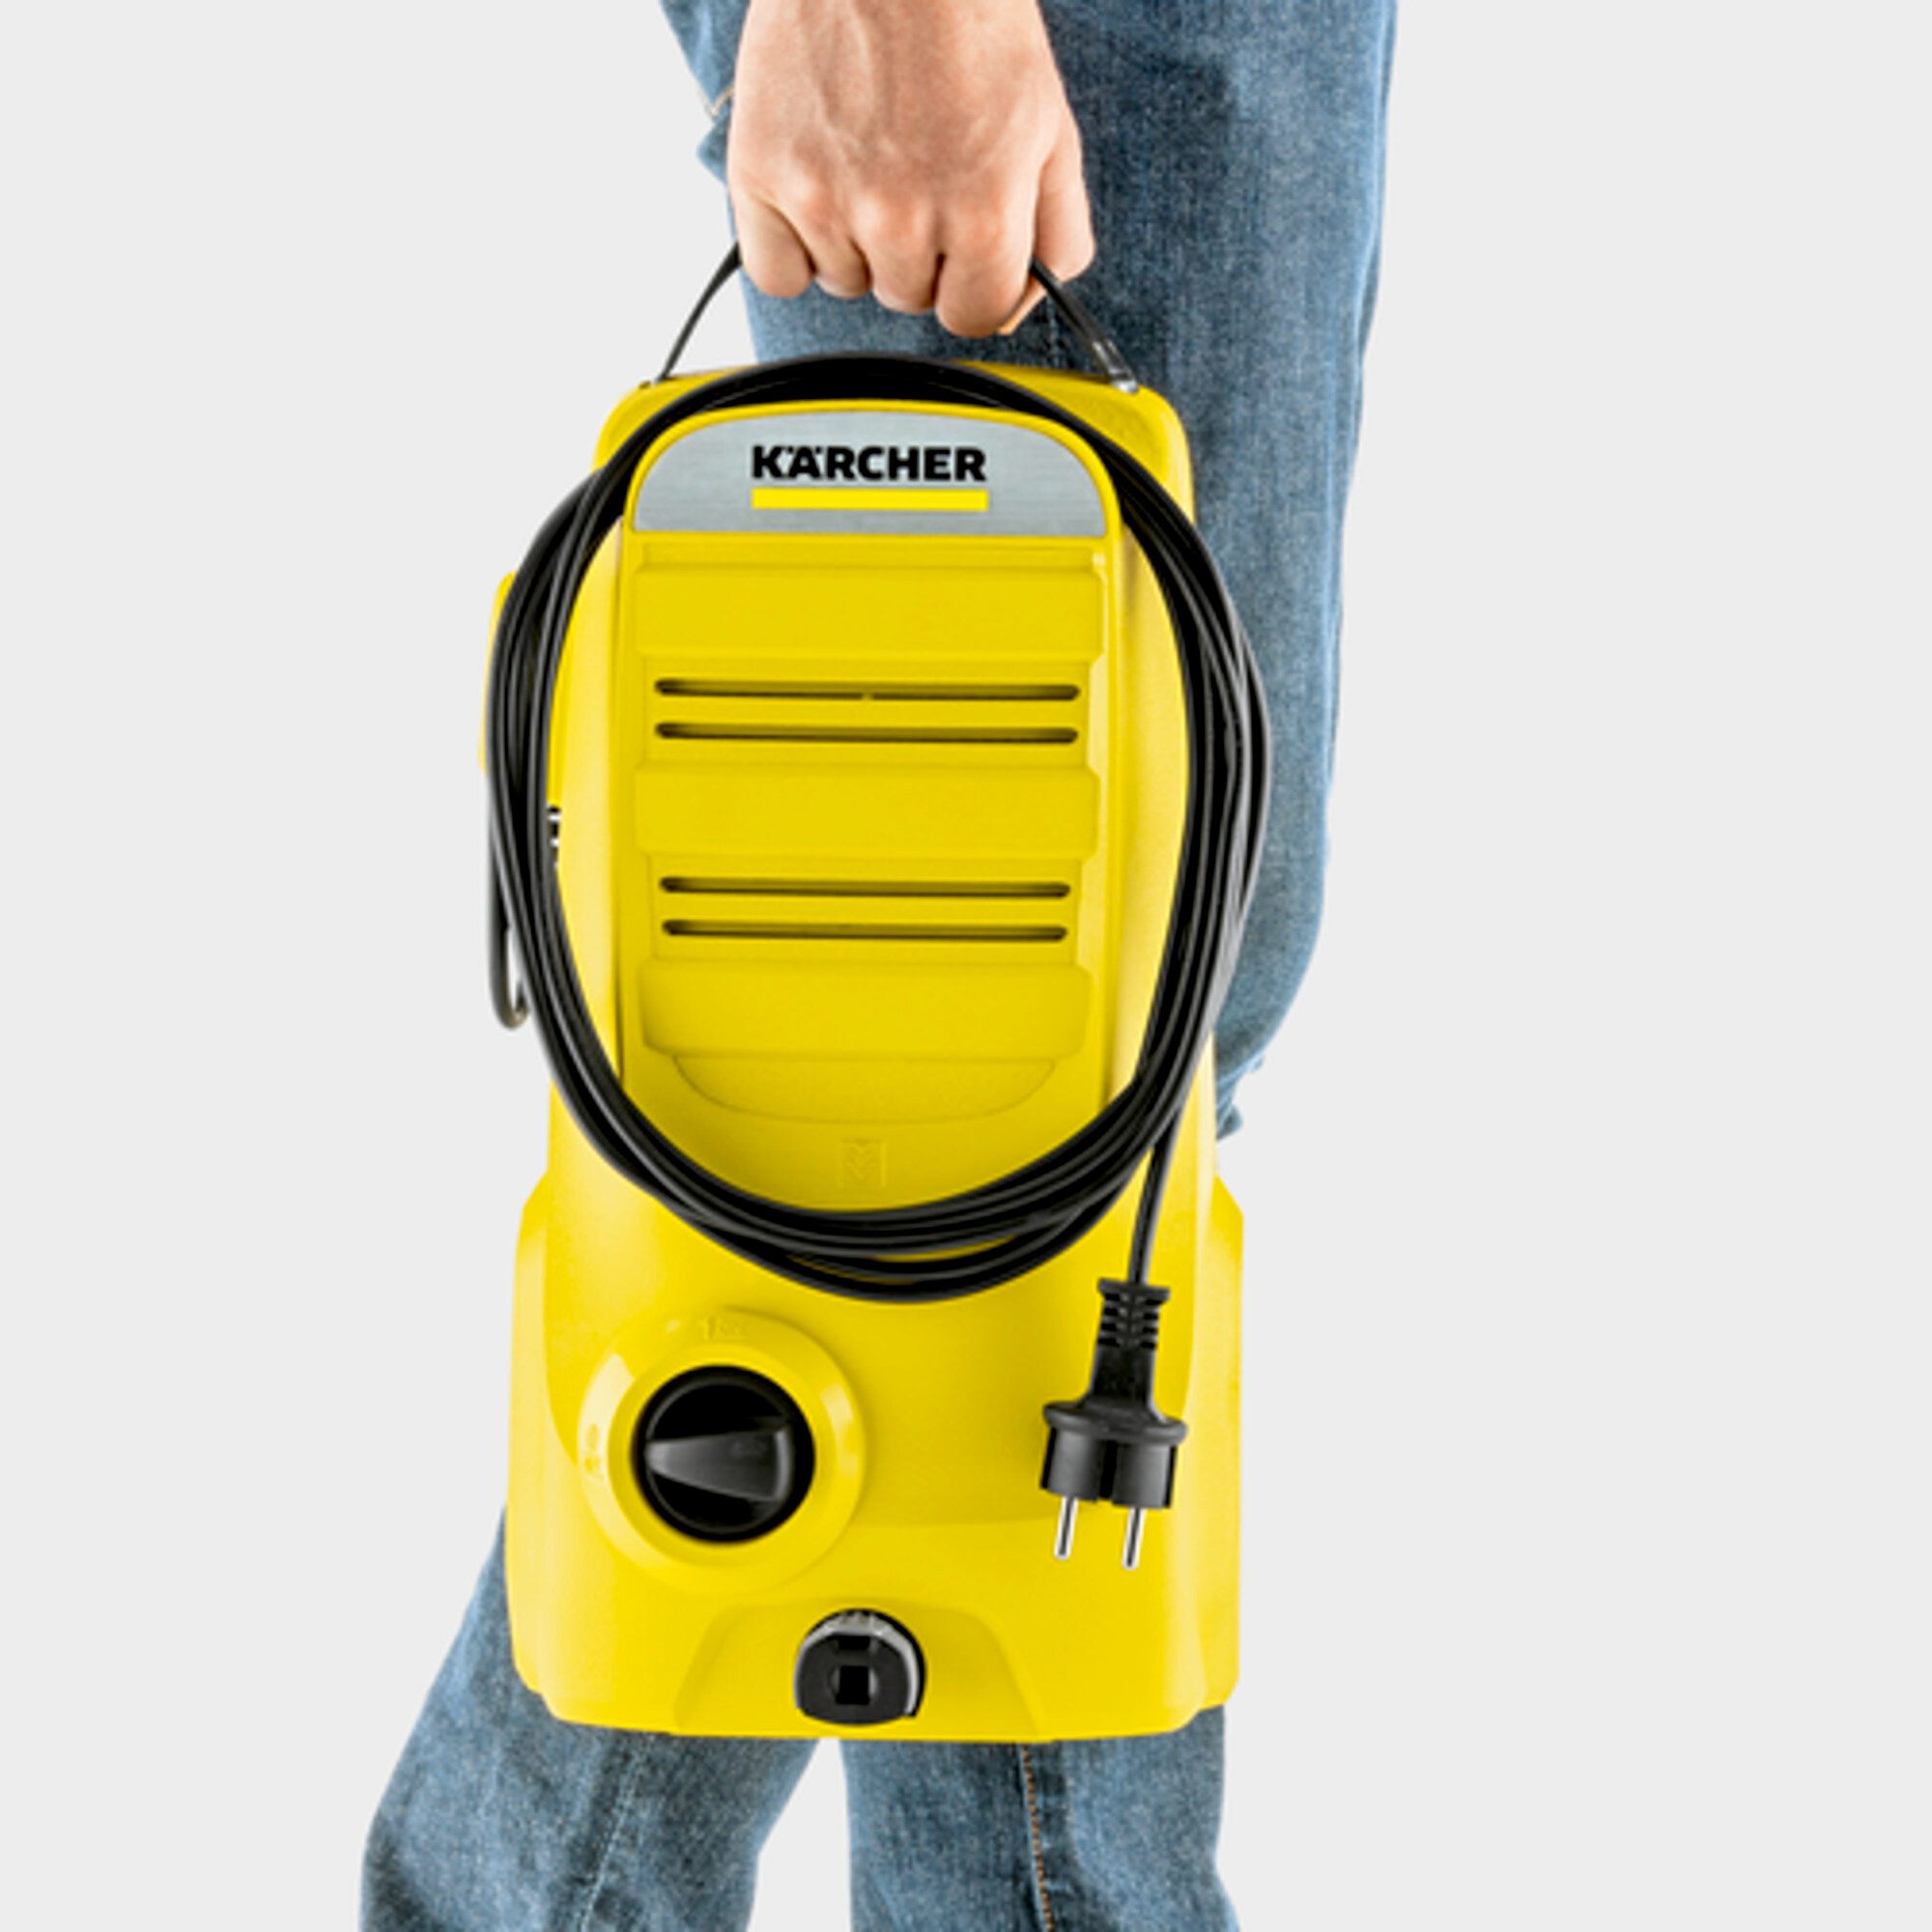 High pressure washer K 2 Compact: Sits comfortably in the hand